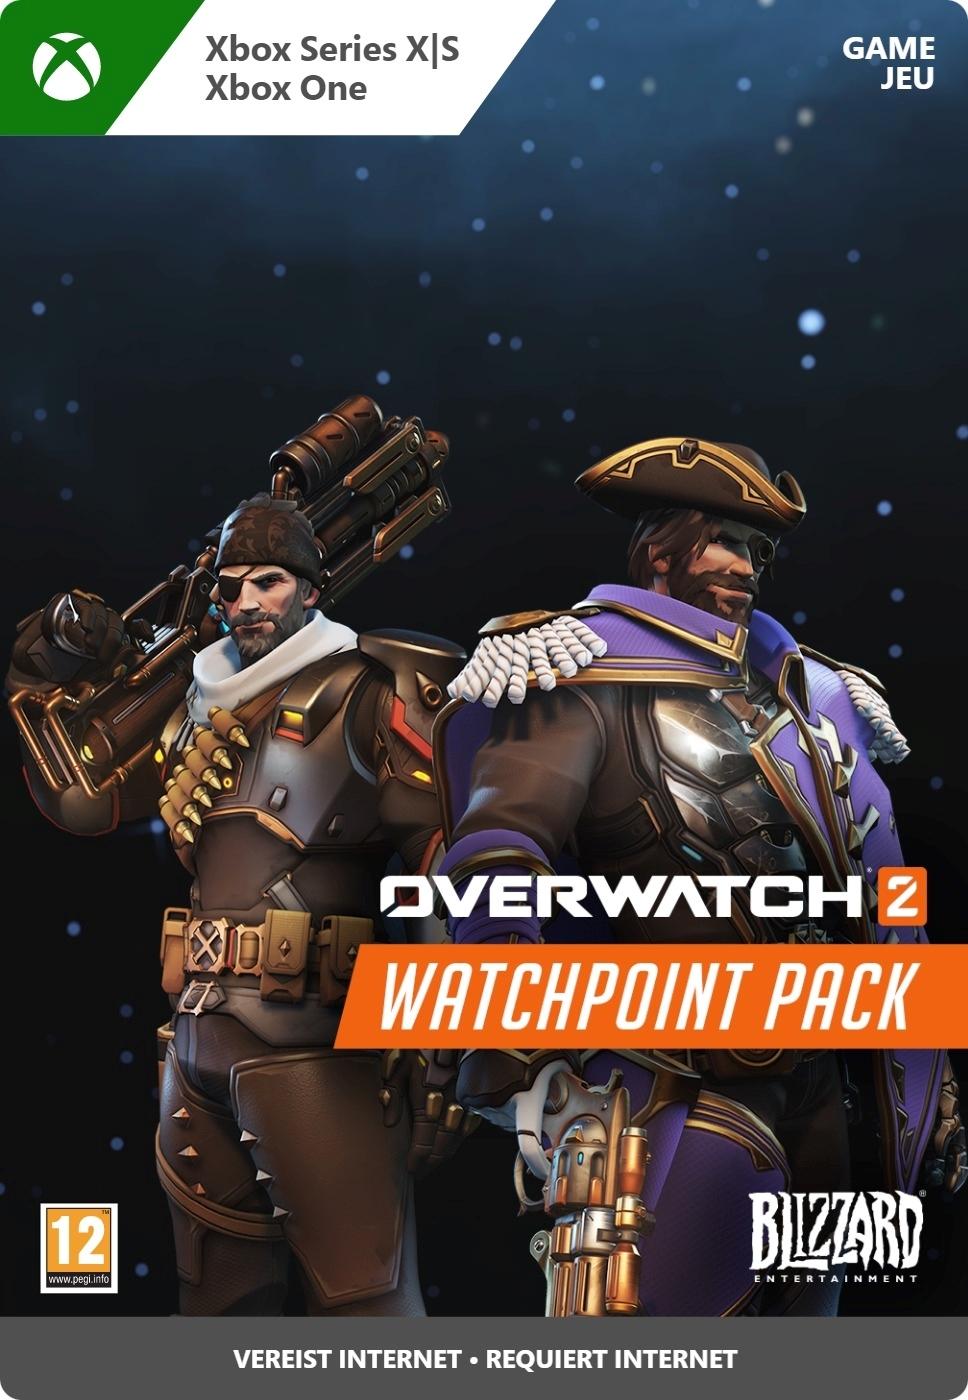 Overwatch 2: Watchpoint Pack - Xbox Series X/Xbox One - Game | G3Q-01437 (cac95a25-8250-1f4d-b6ac-f9047418a2b4)